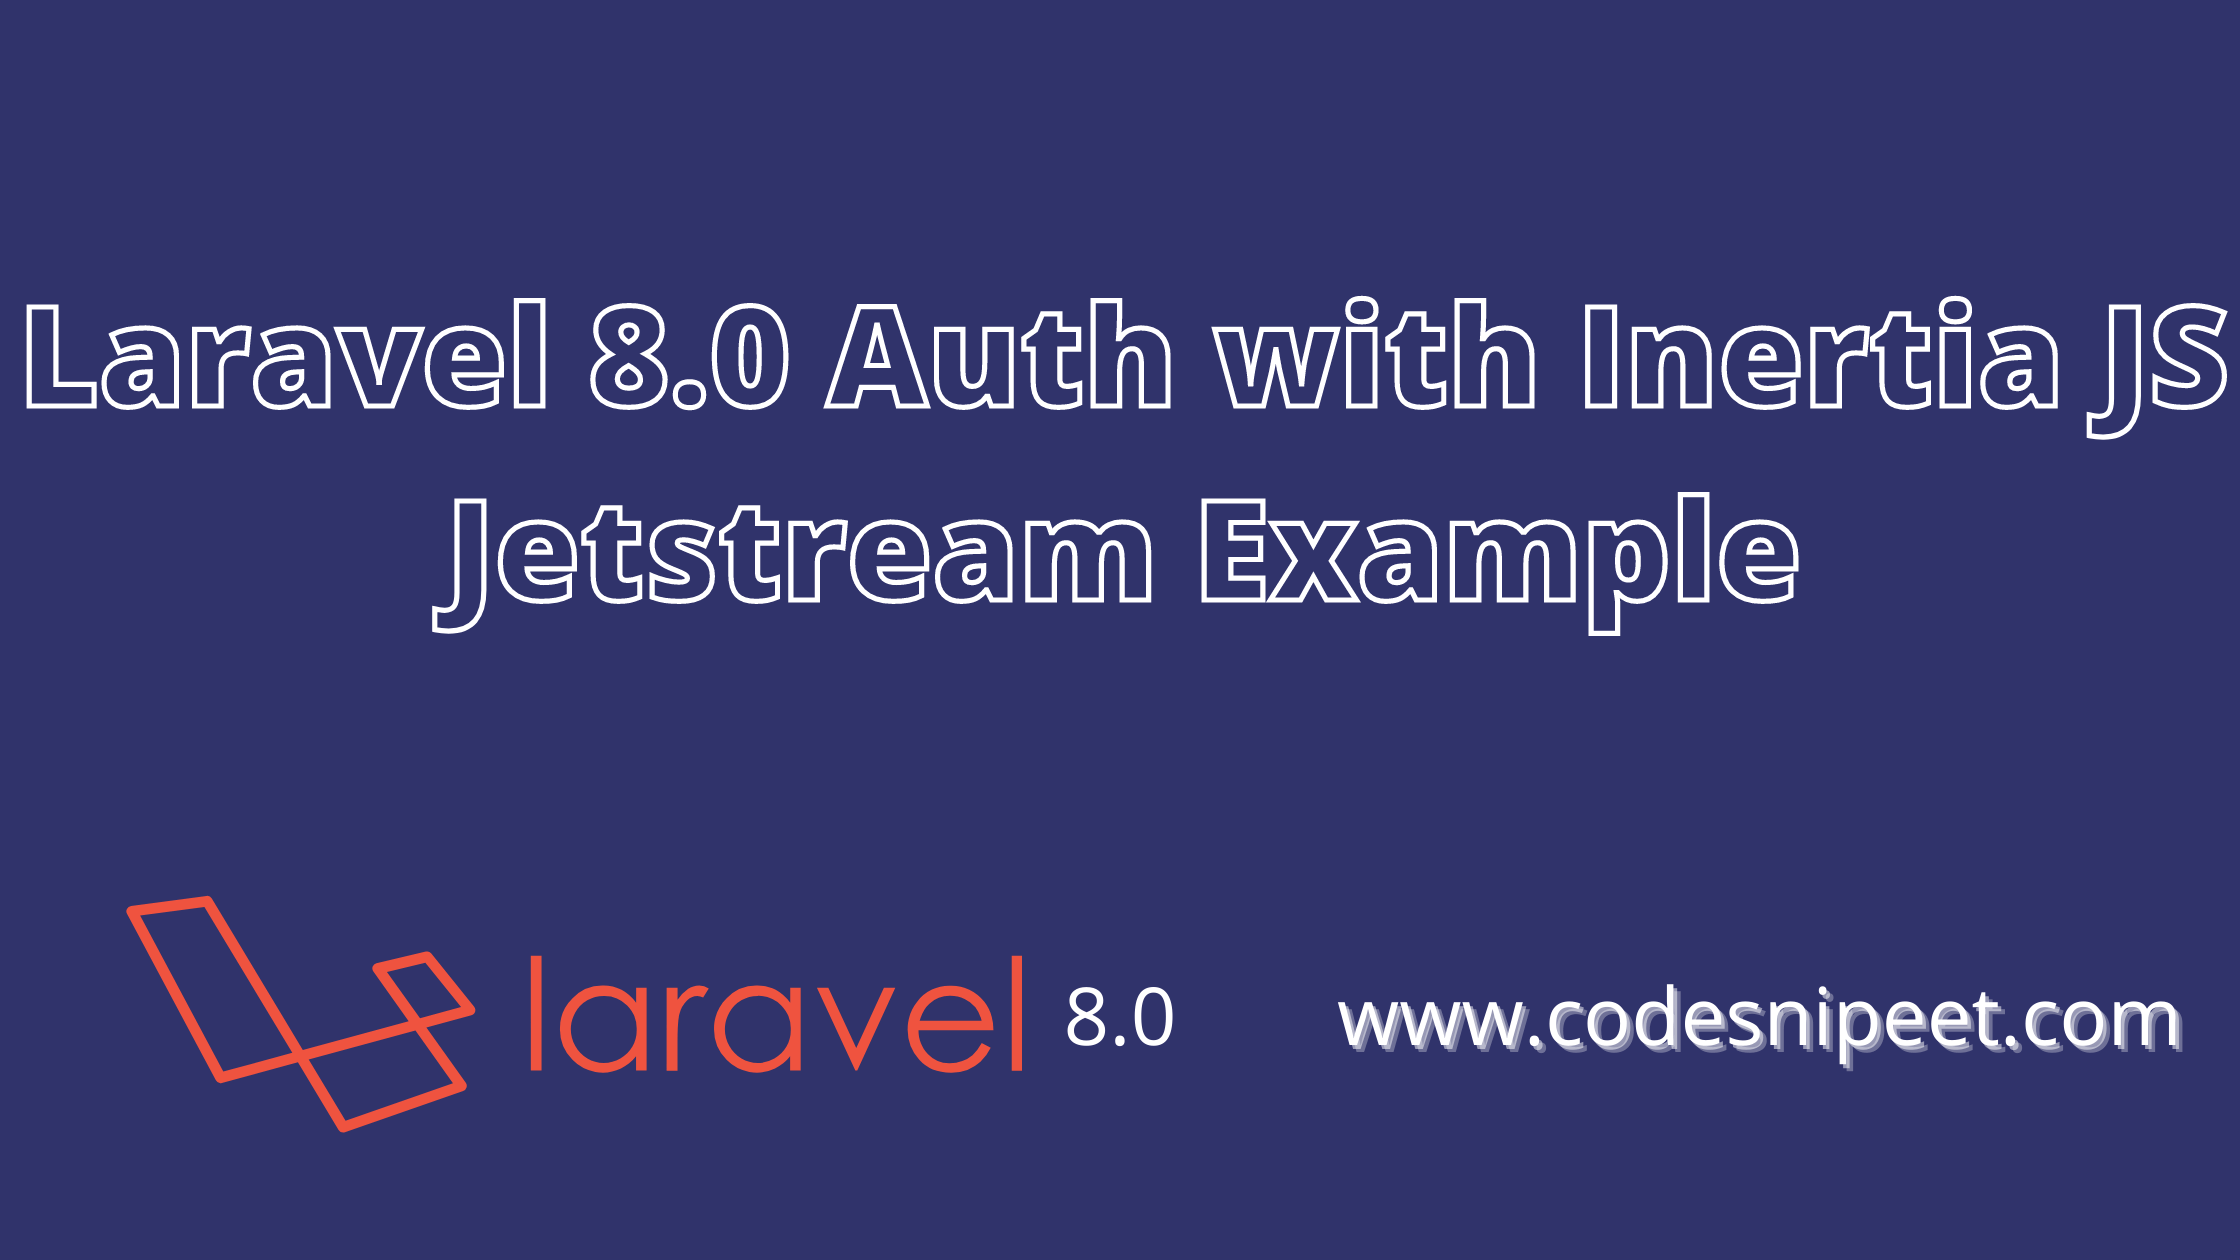 You are currently viewing Laravel 8.0 Auth with Inertia JS Jetstream Example